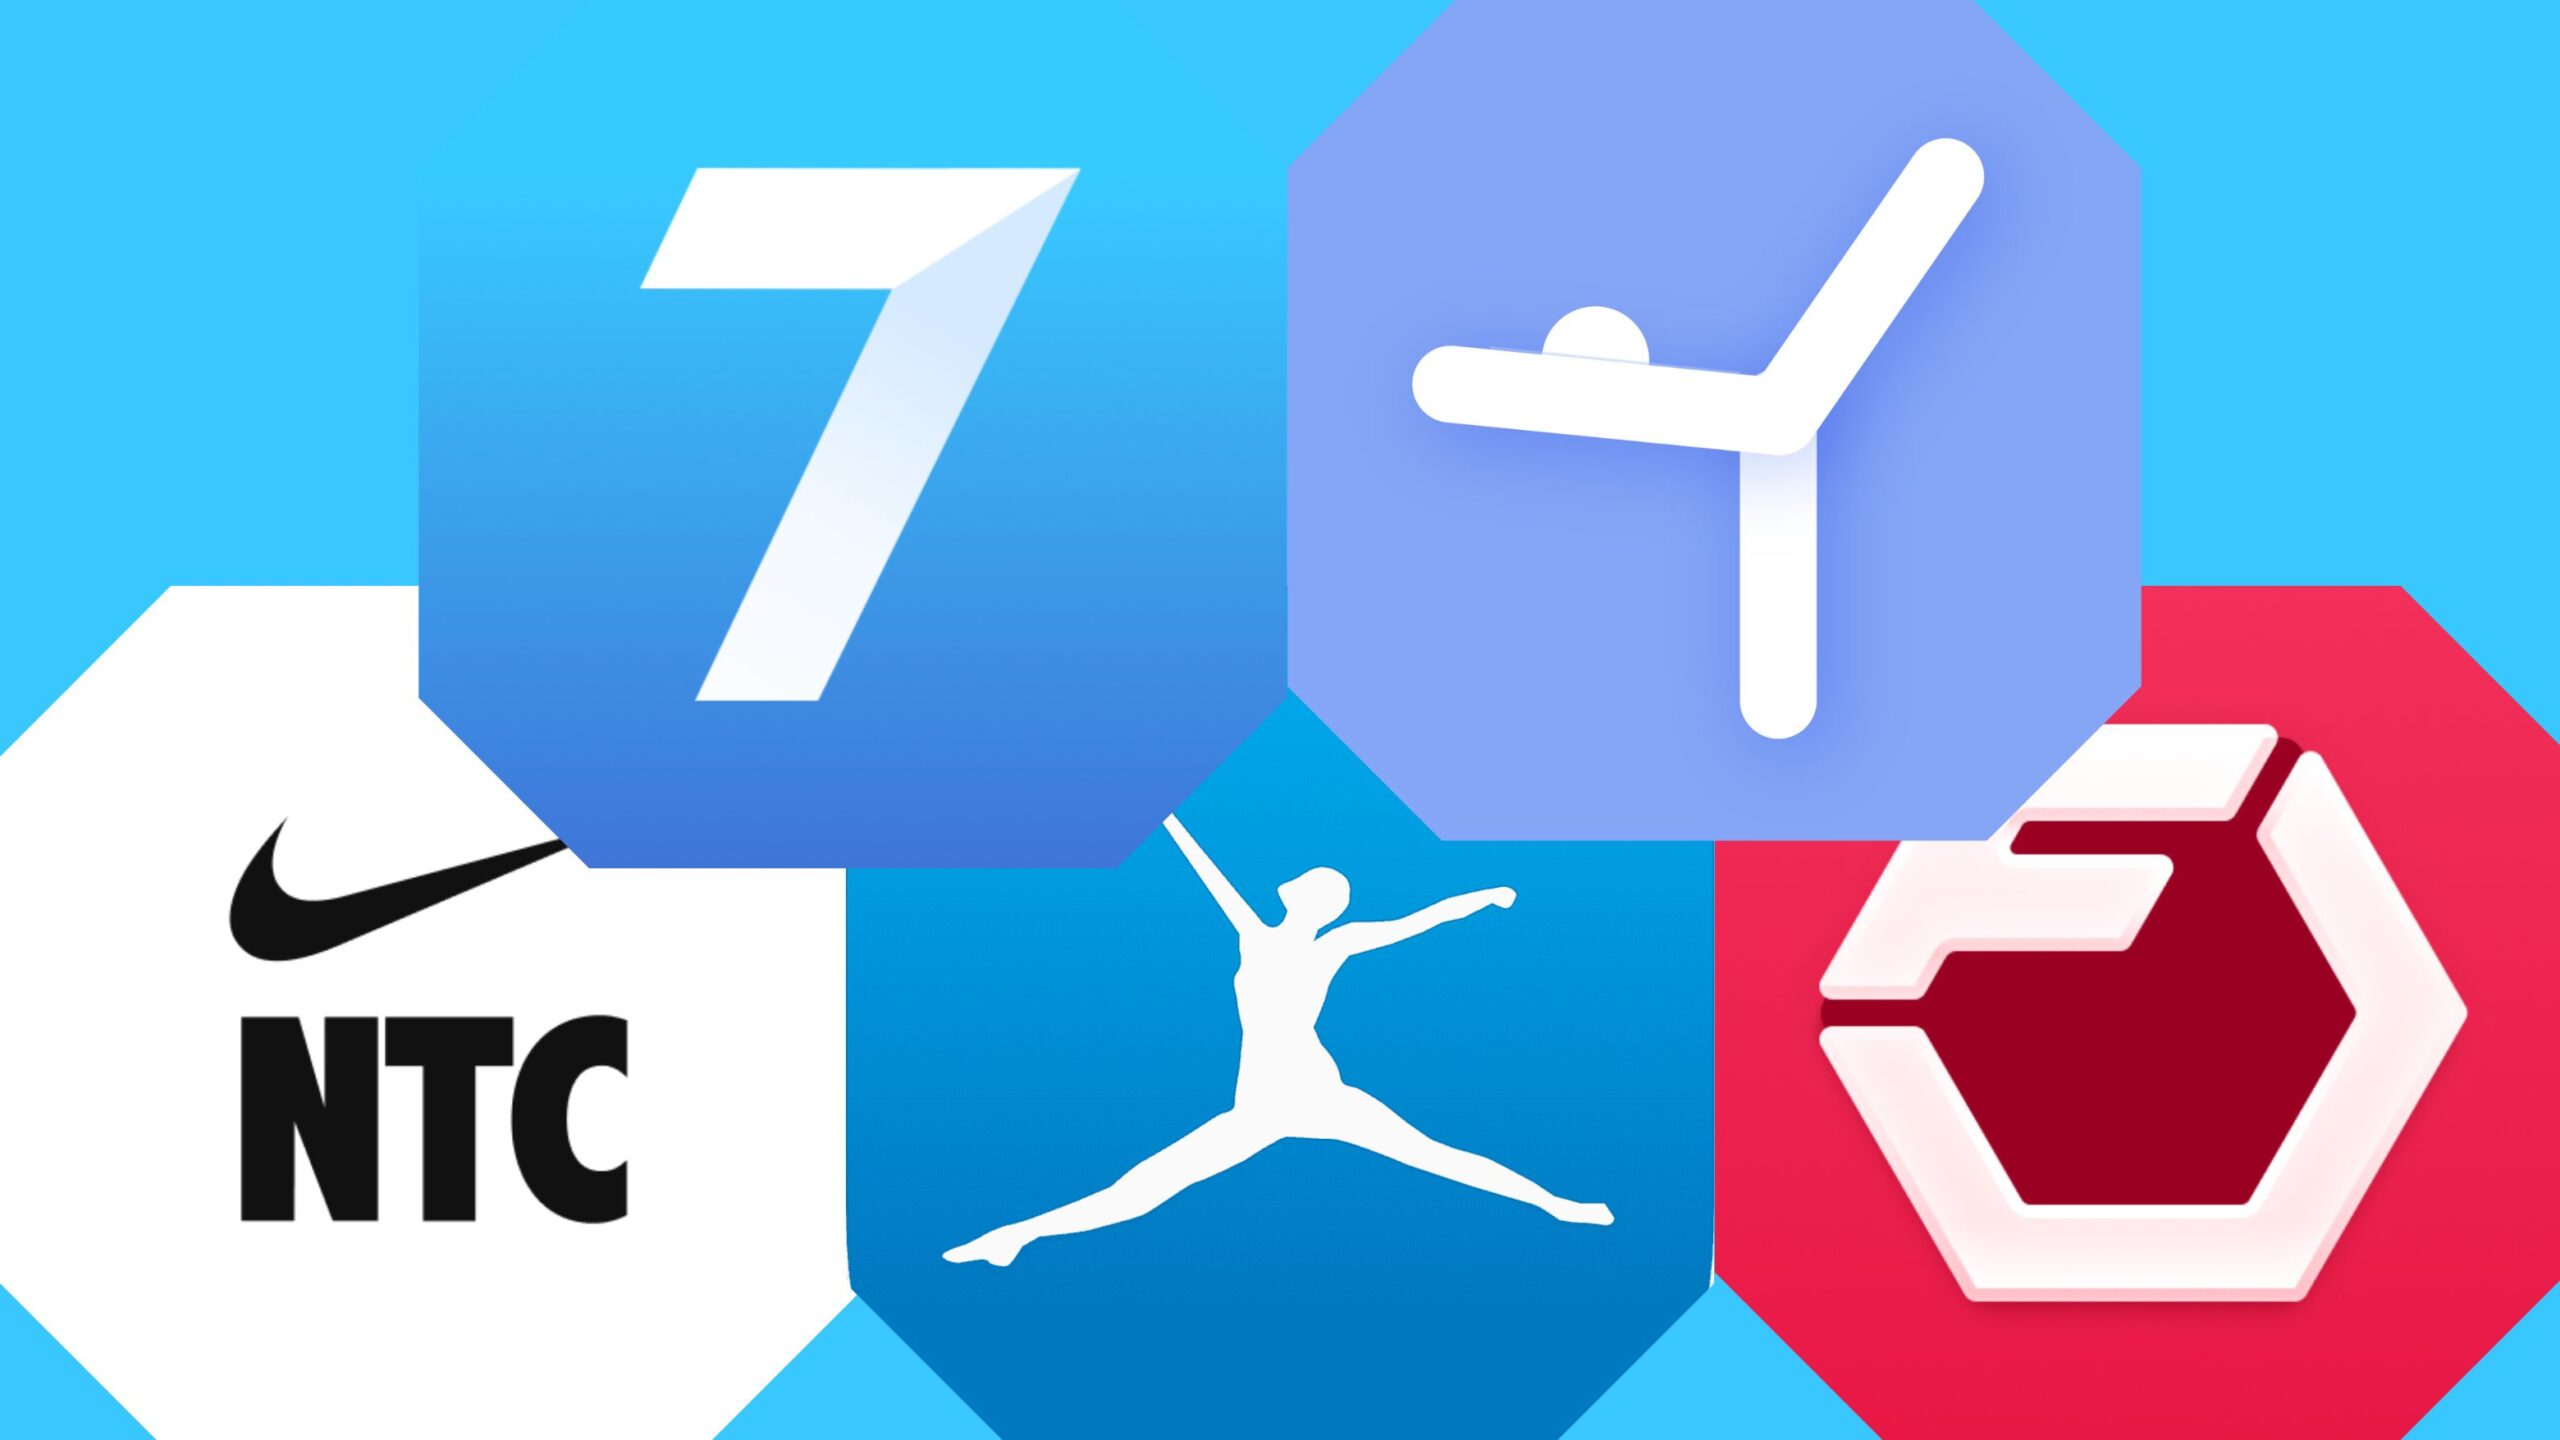 Logos of fitness apps